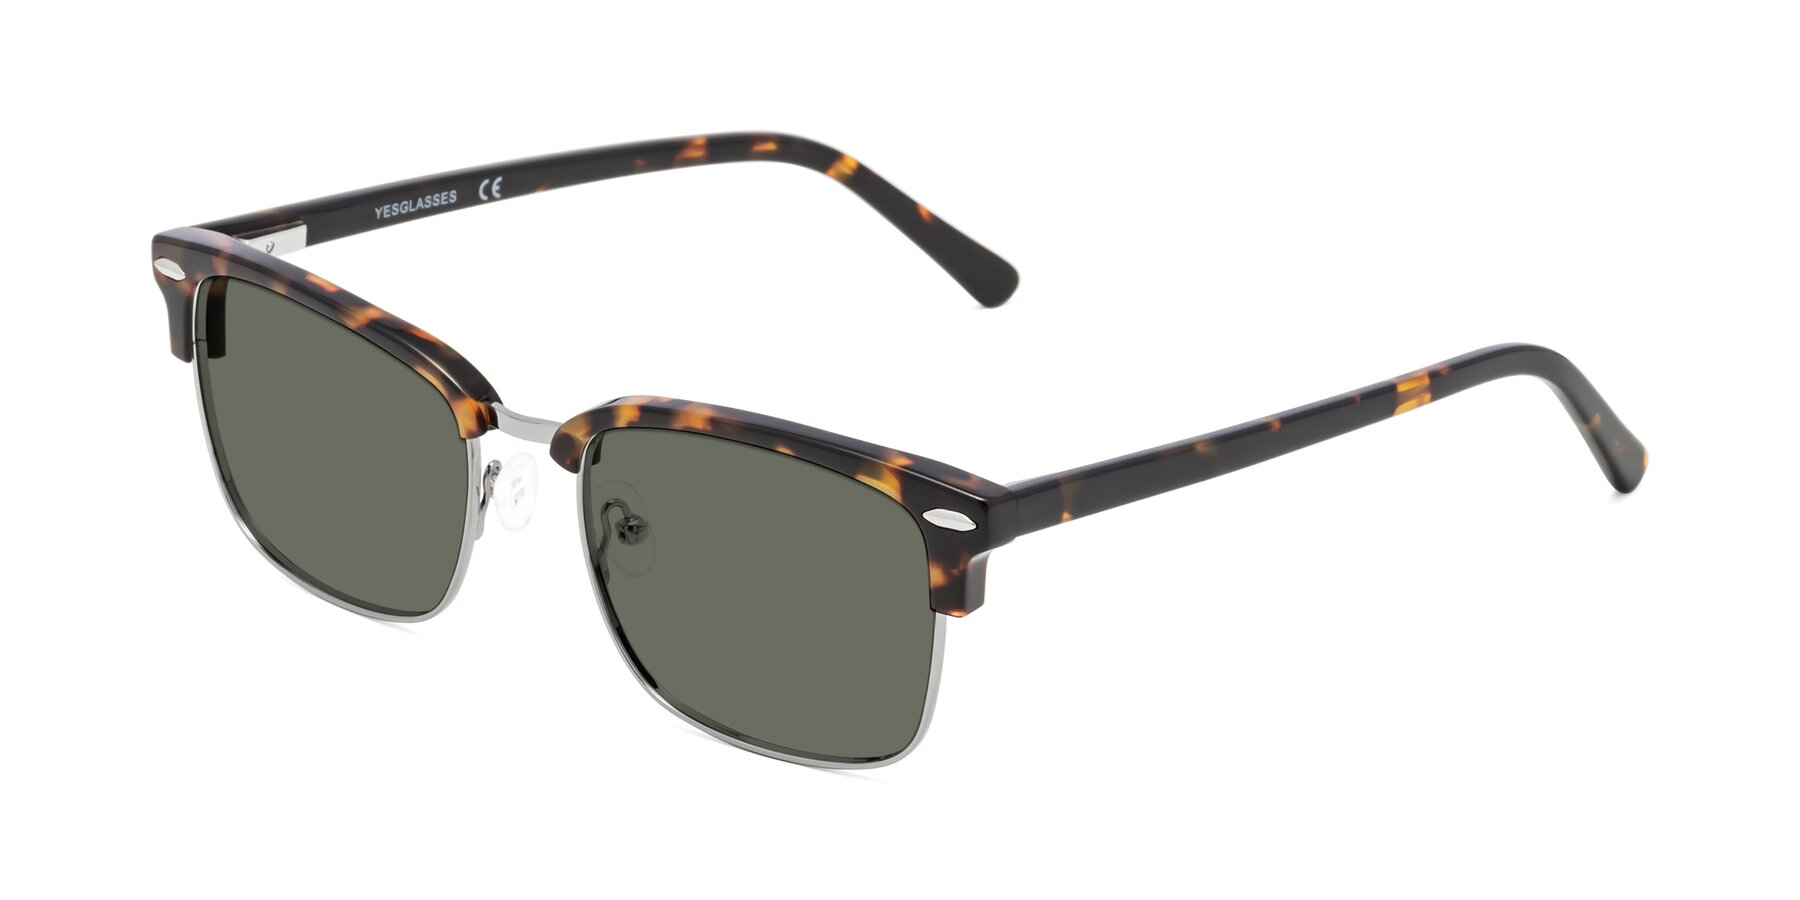 Angle of 17464 in Tortoise/ Gunmetal with Gray Polarized Lenses